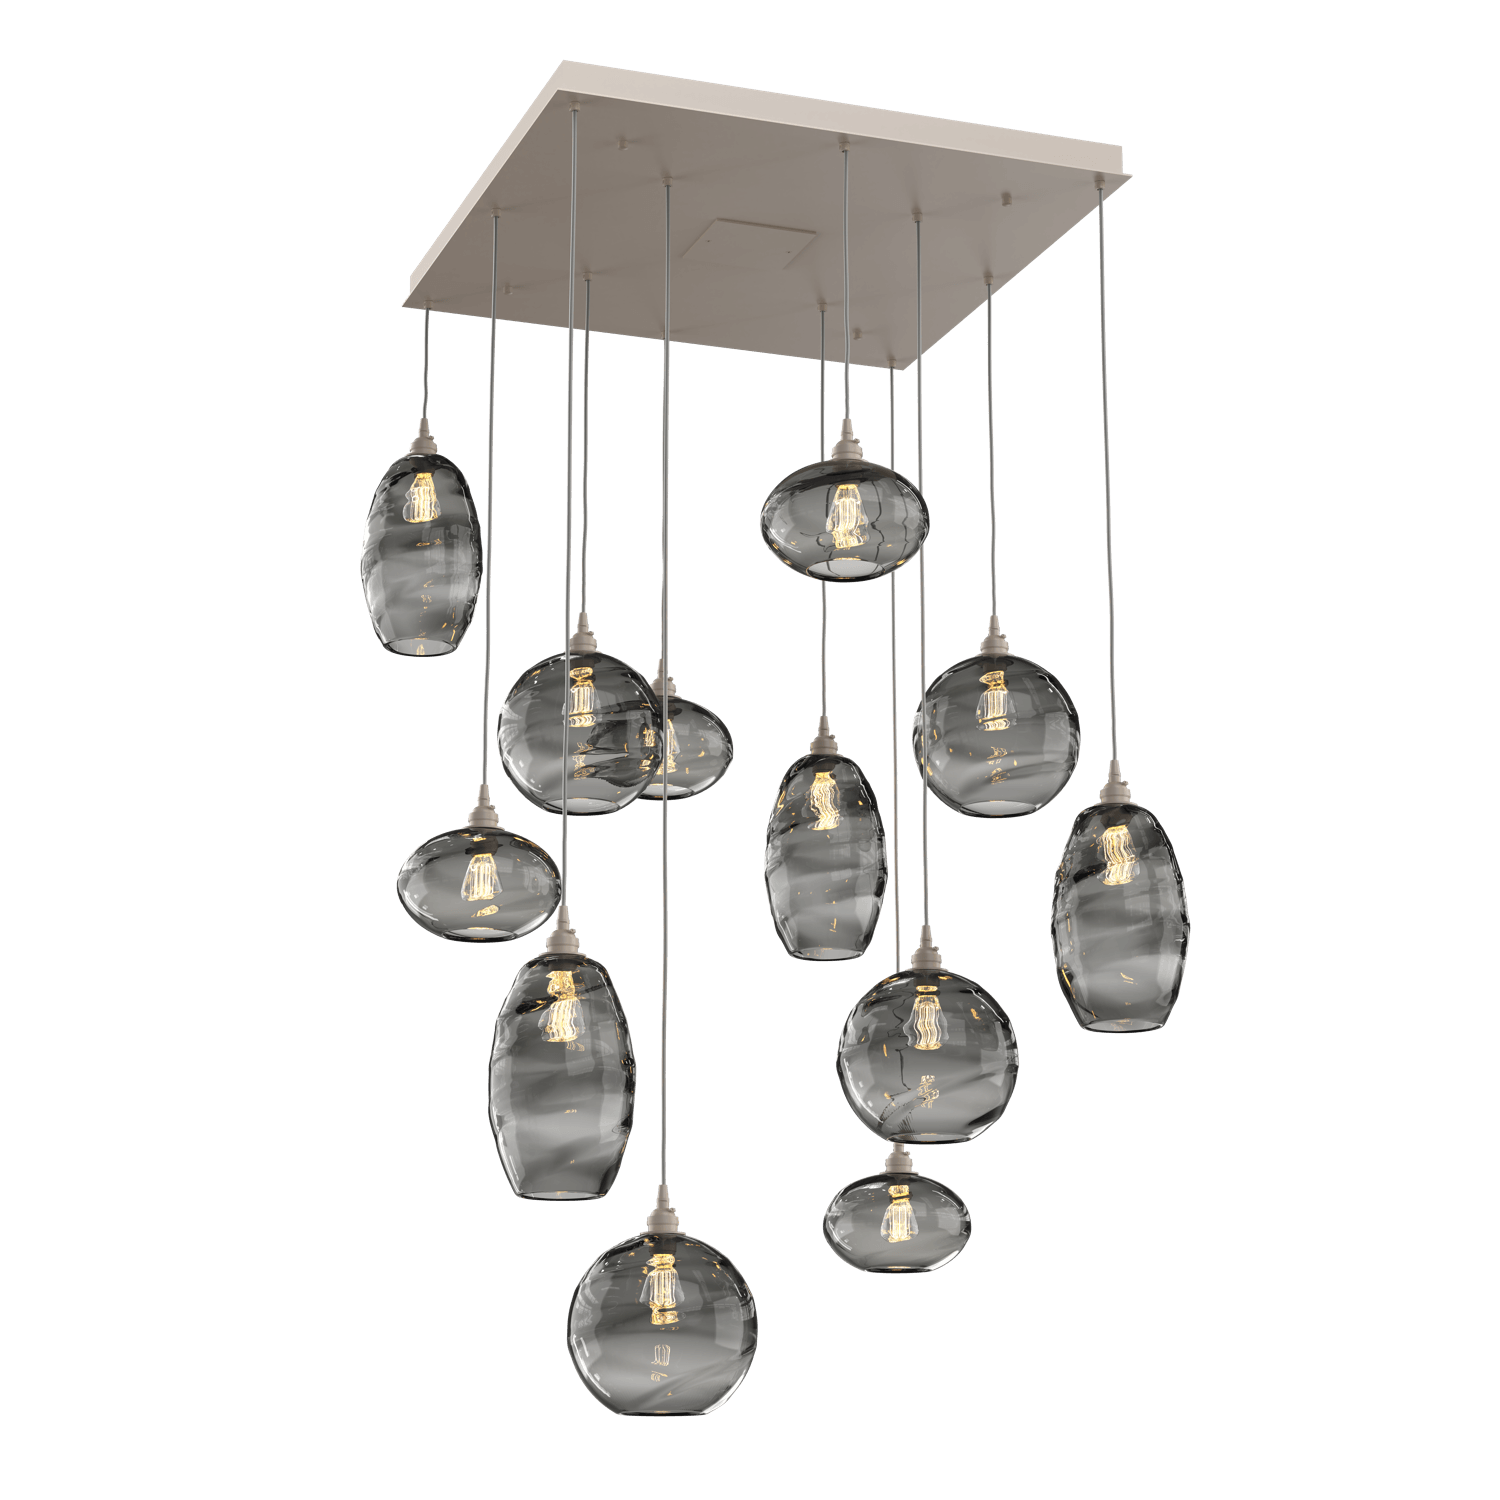 CHB0048-12-BS-OS-Hammerton-Studio-Optic-Blown-Glass-Misto-12-light-square-pendant-chandelier-with-metallic-beige-silver-finish-and-optic-smoke-blown-glass-shades-and-incandescent-lamping